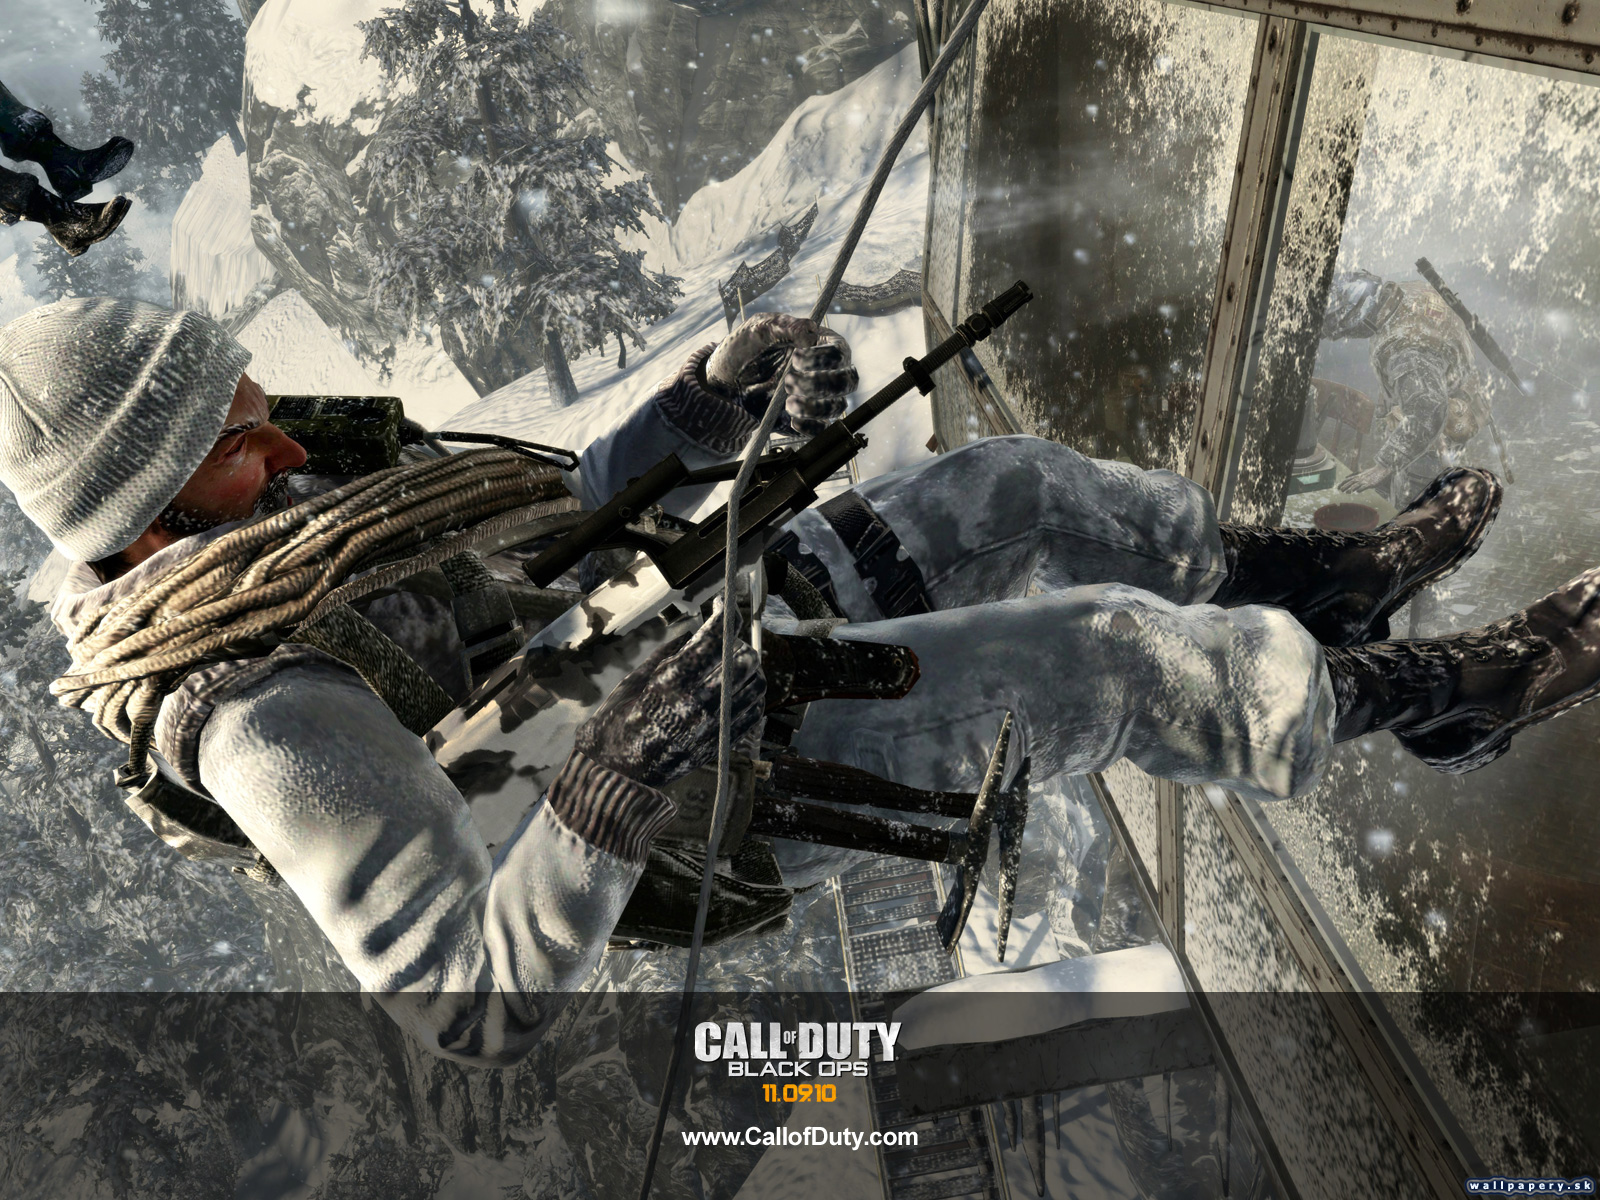 Call of Duty: Black Ops - wallpaper 23